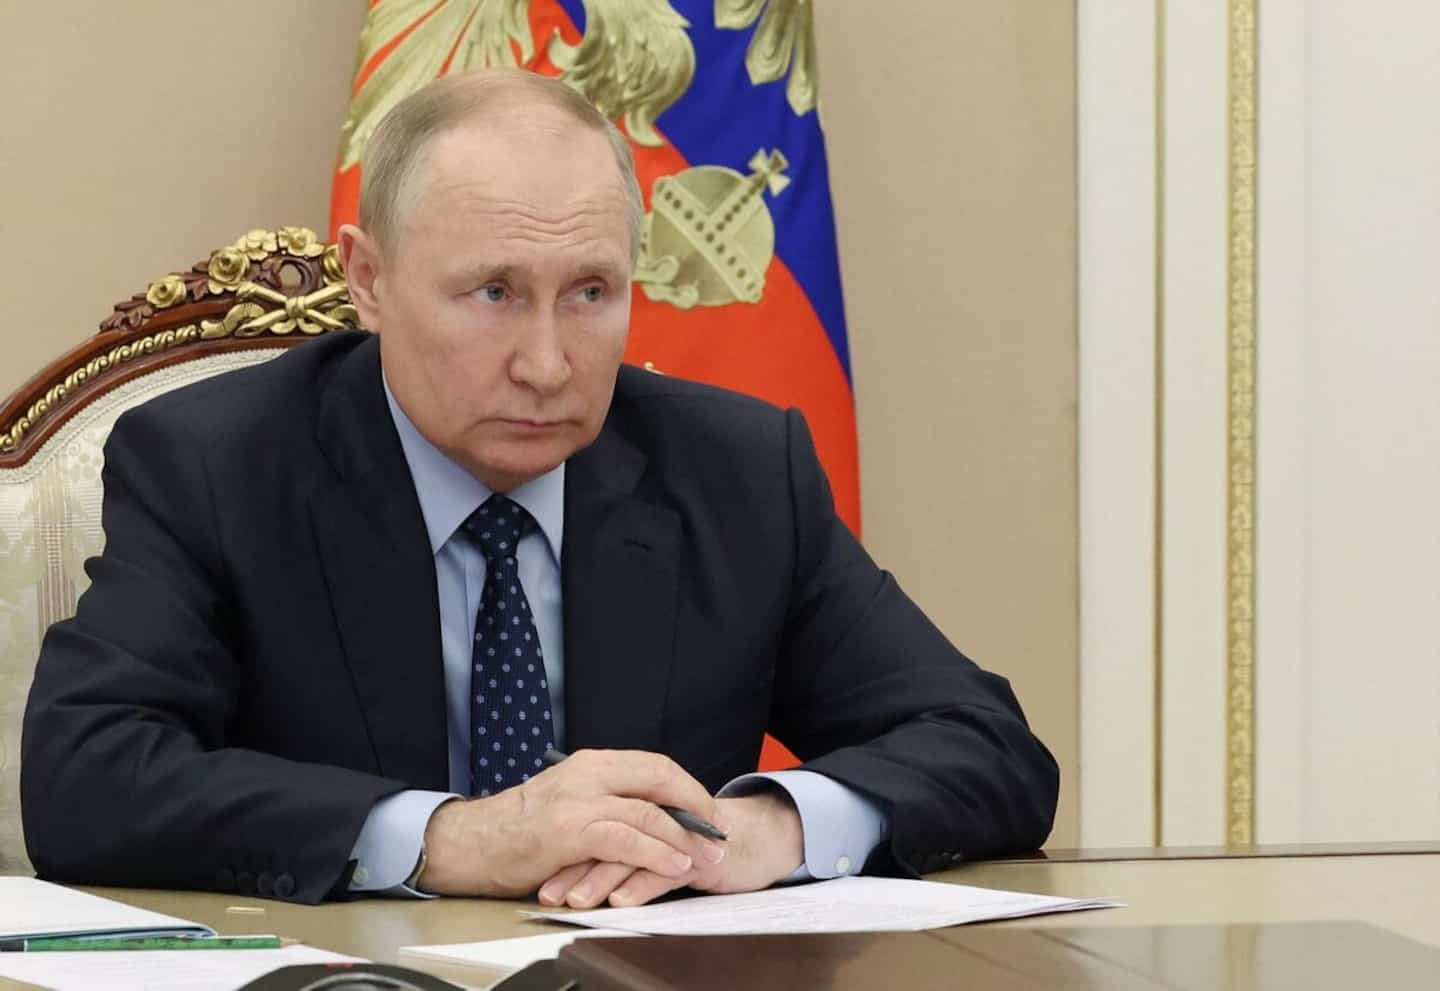 Vladimir Putin wants to overcome the difficult challenges caused by the sanctions